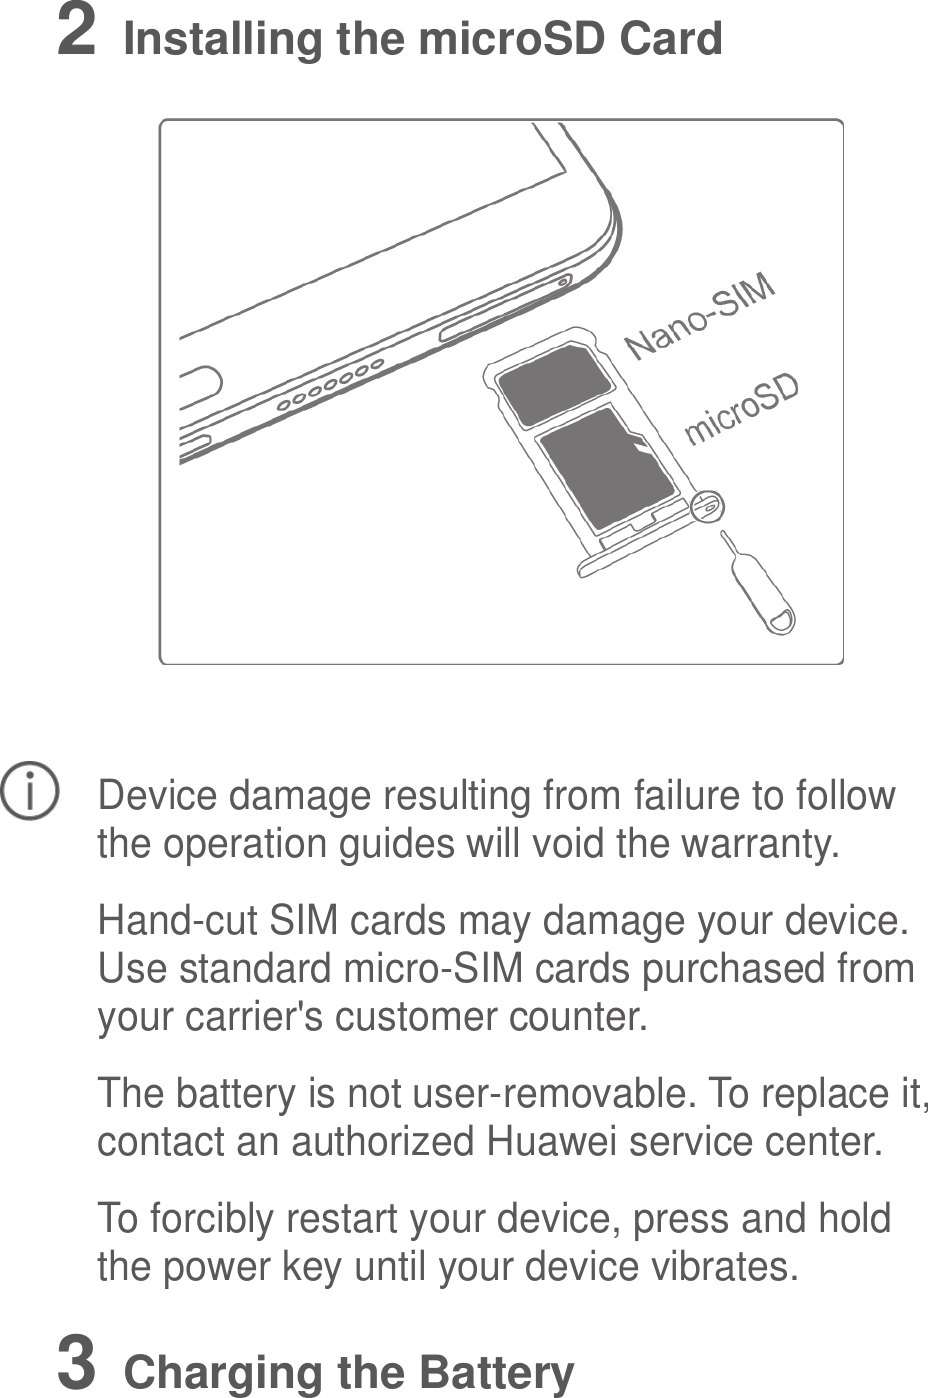  2   Installing the microSD Card   Device damage resulting from failure to follow the operation guides will void the warranty. Hand-cut SIM cards may damage your device. Use standard micro-SIM cards purchased from your carrier&apos;s customer counter. The battery is not user-removable. To replace it, contact an authorized Huawei service center. To forcibly restart your device, press and hold the power key until your device vibrates. 3   Charging the Battery 